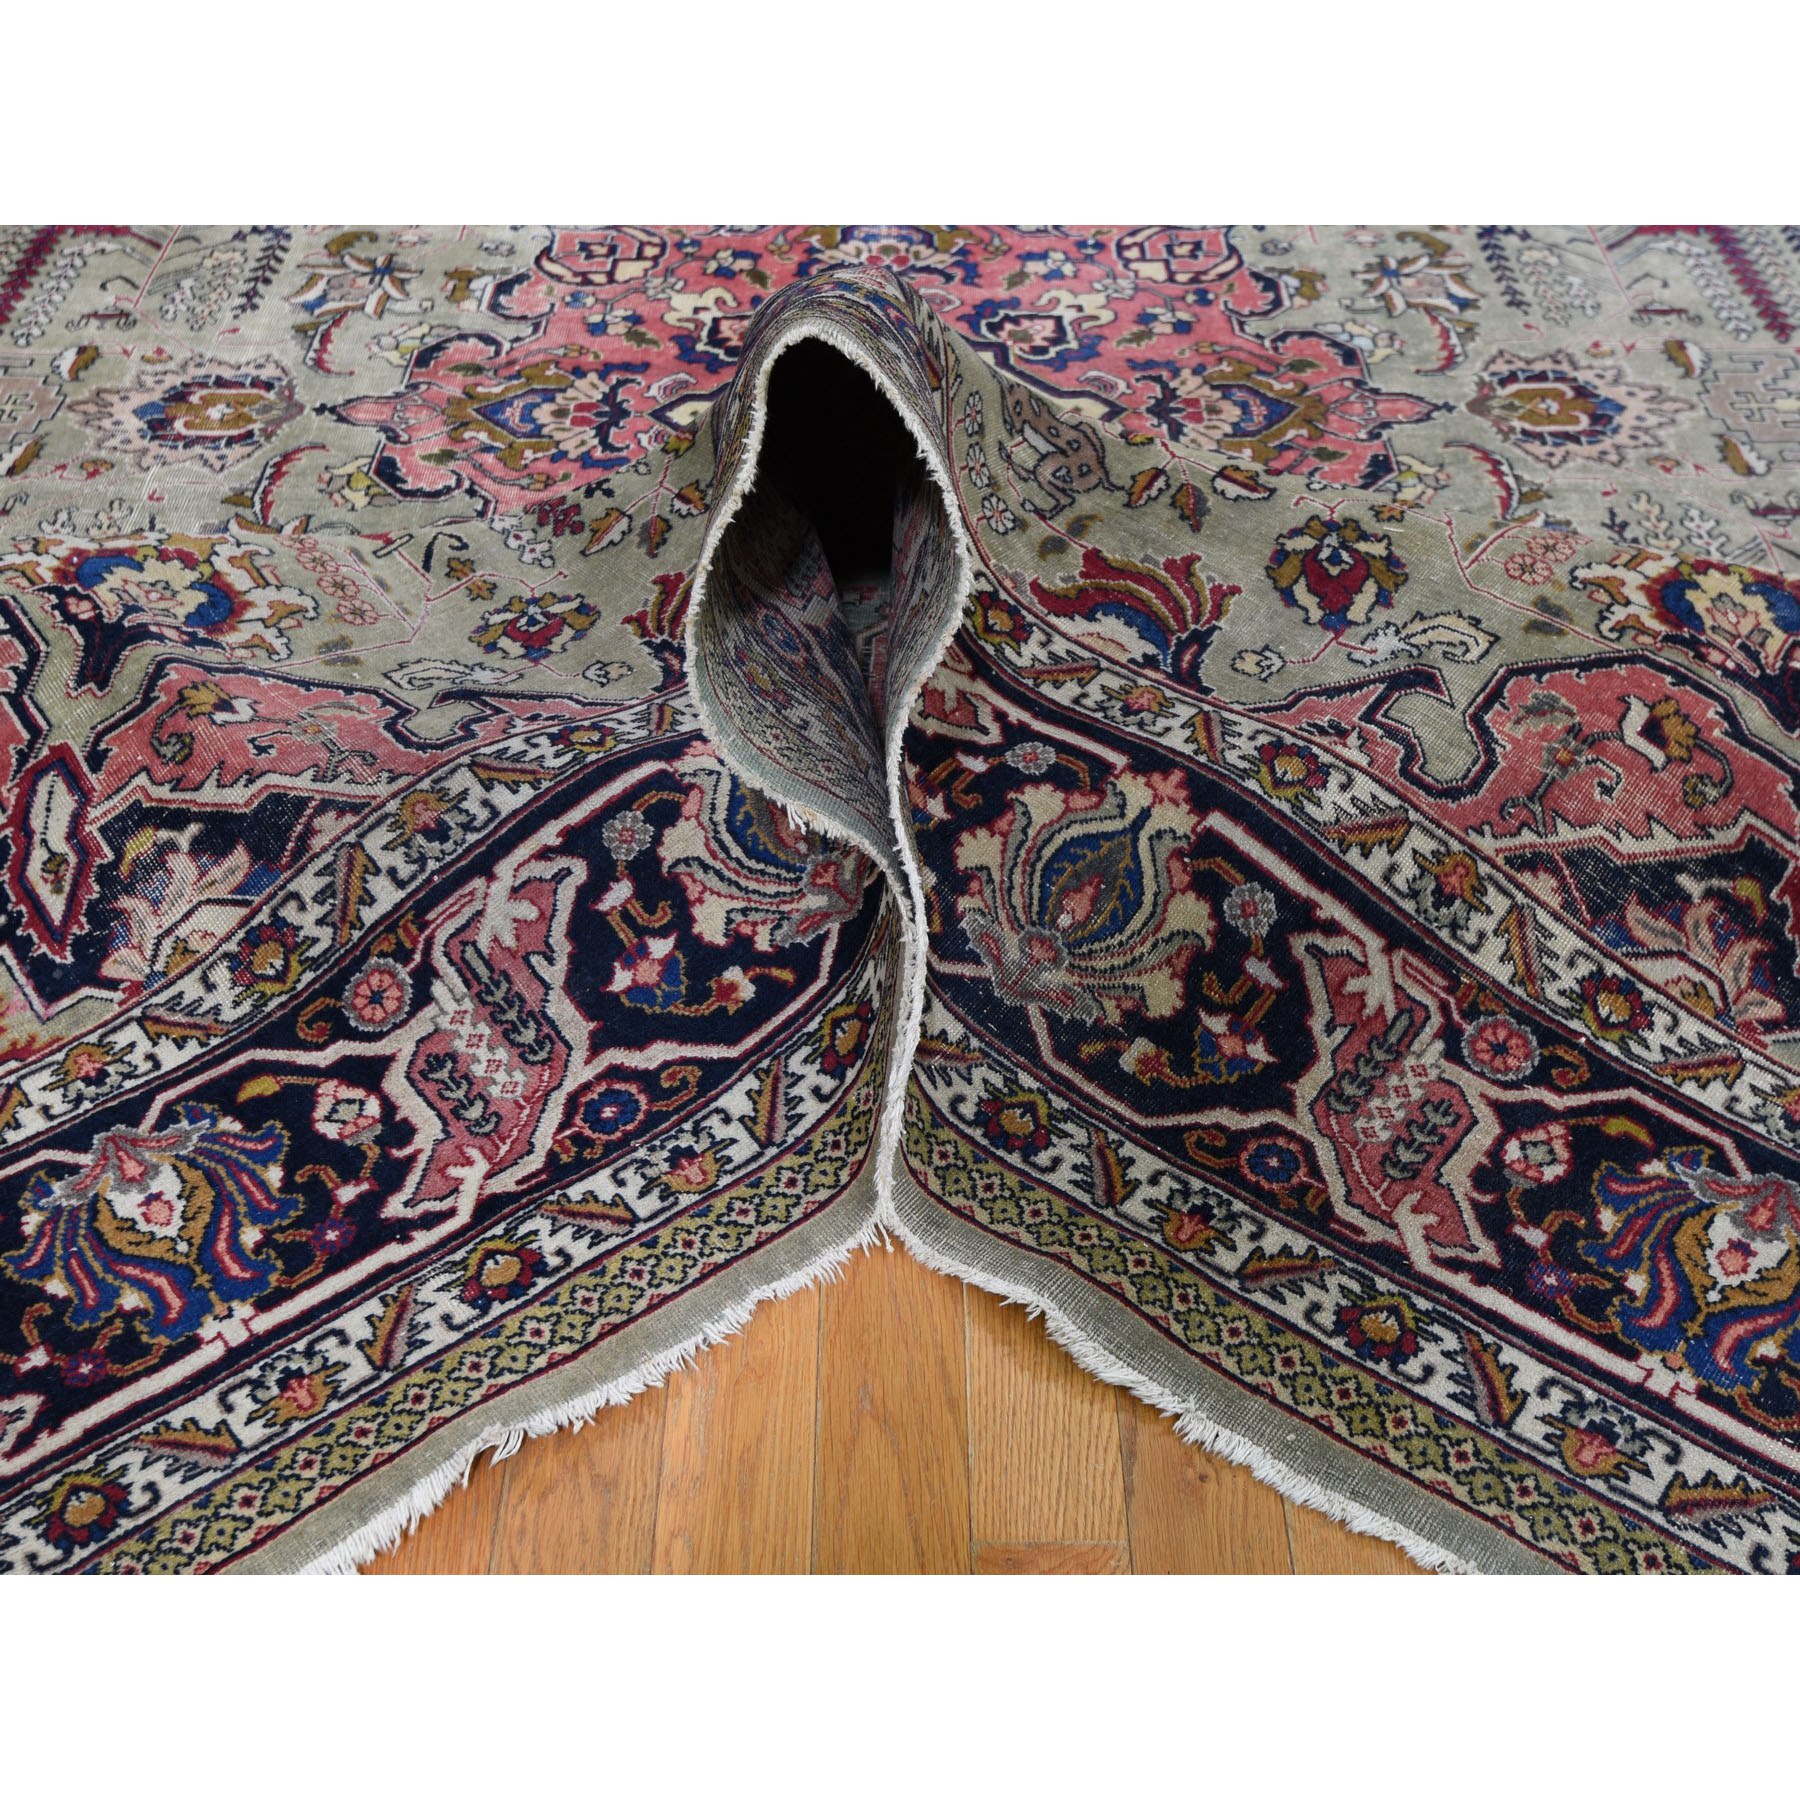 9-4 x12-3  Taupe Green Worn Old Persian Tabriz Vintage Distressed And Clean Bohemian Rug 